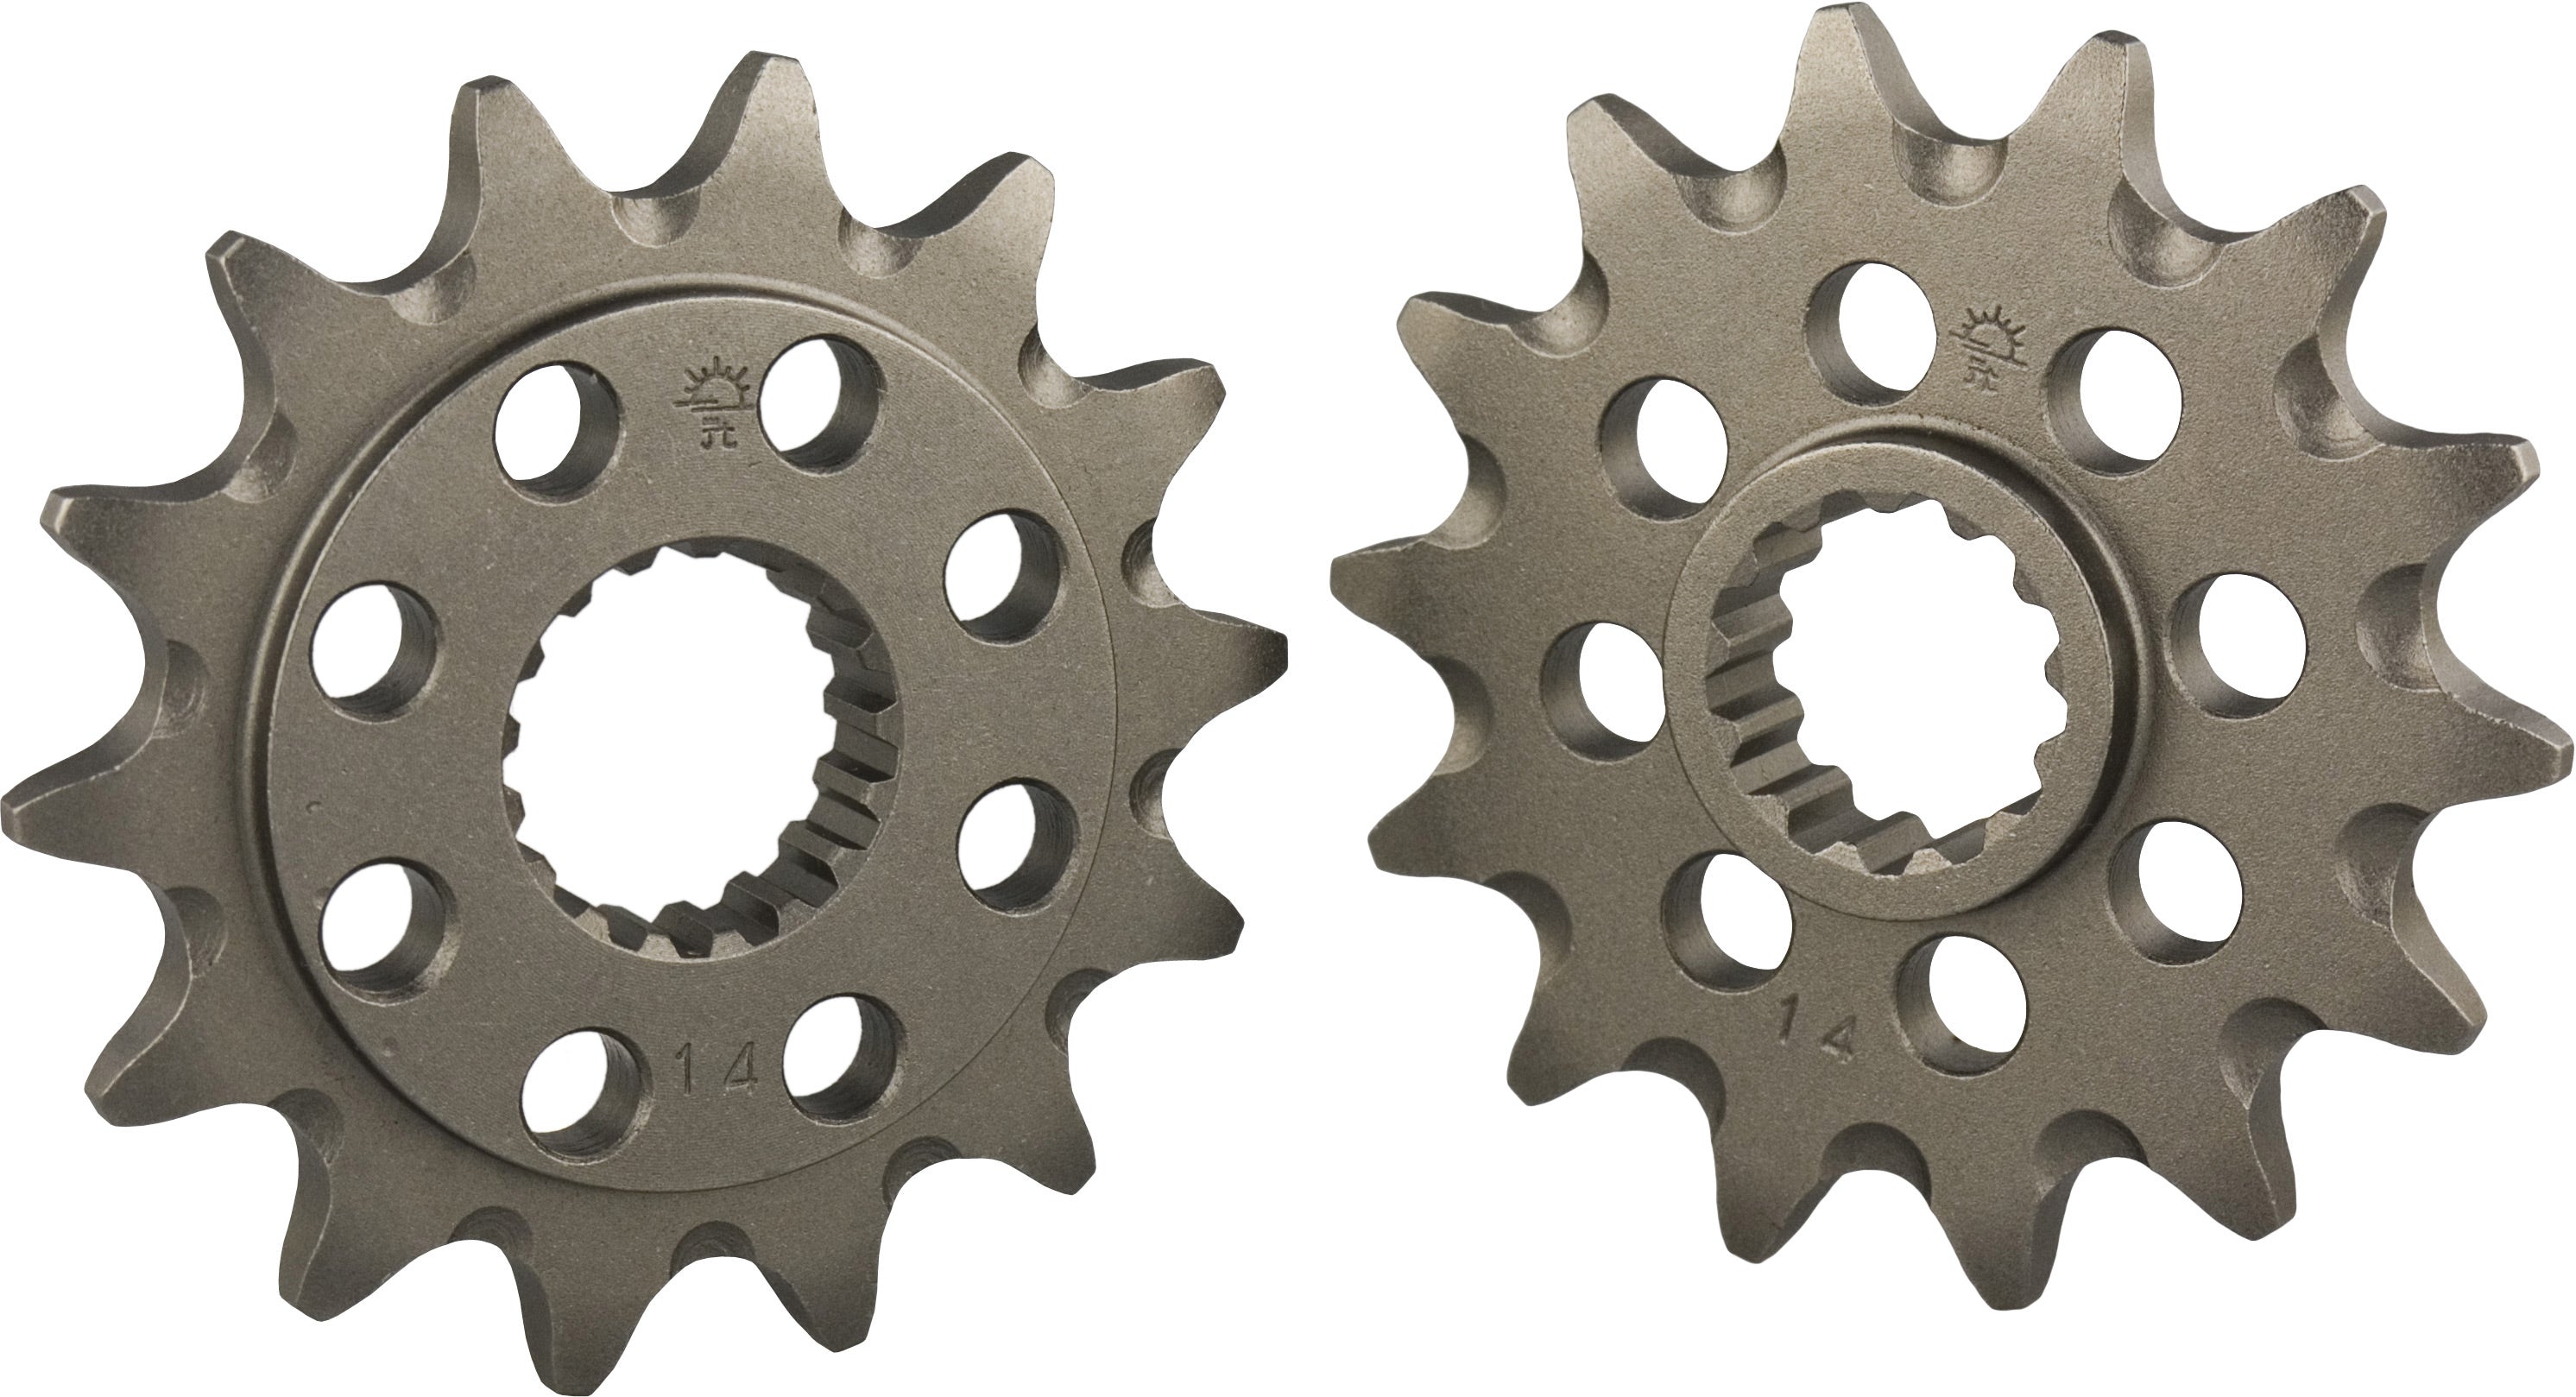 Front Sprocket SX85 TC85 18-23 13T, 13 teeth, motorcycle part, close-up view